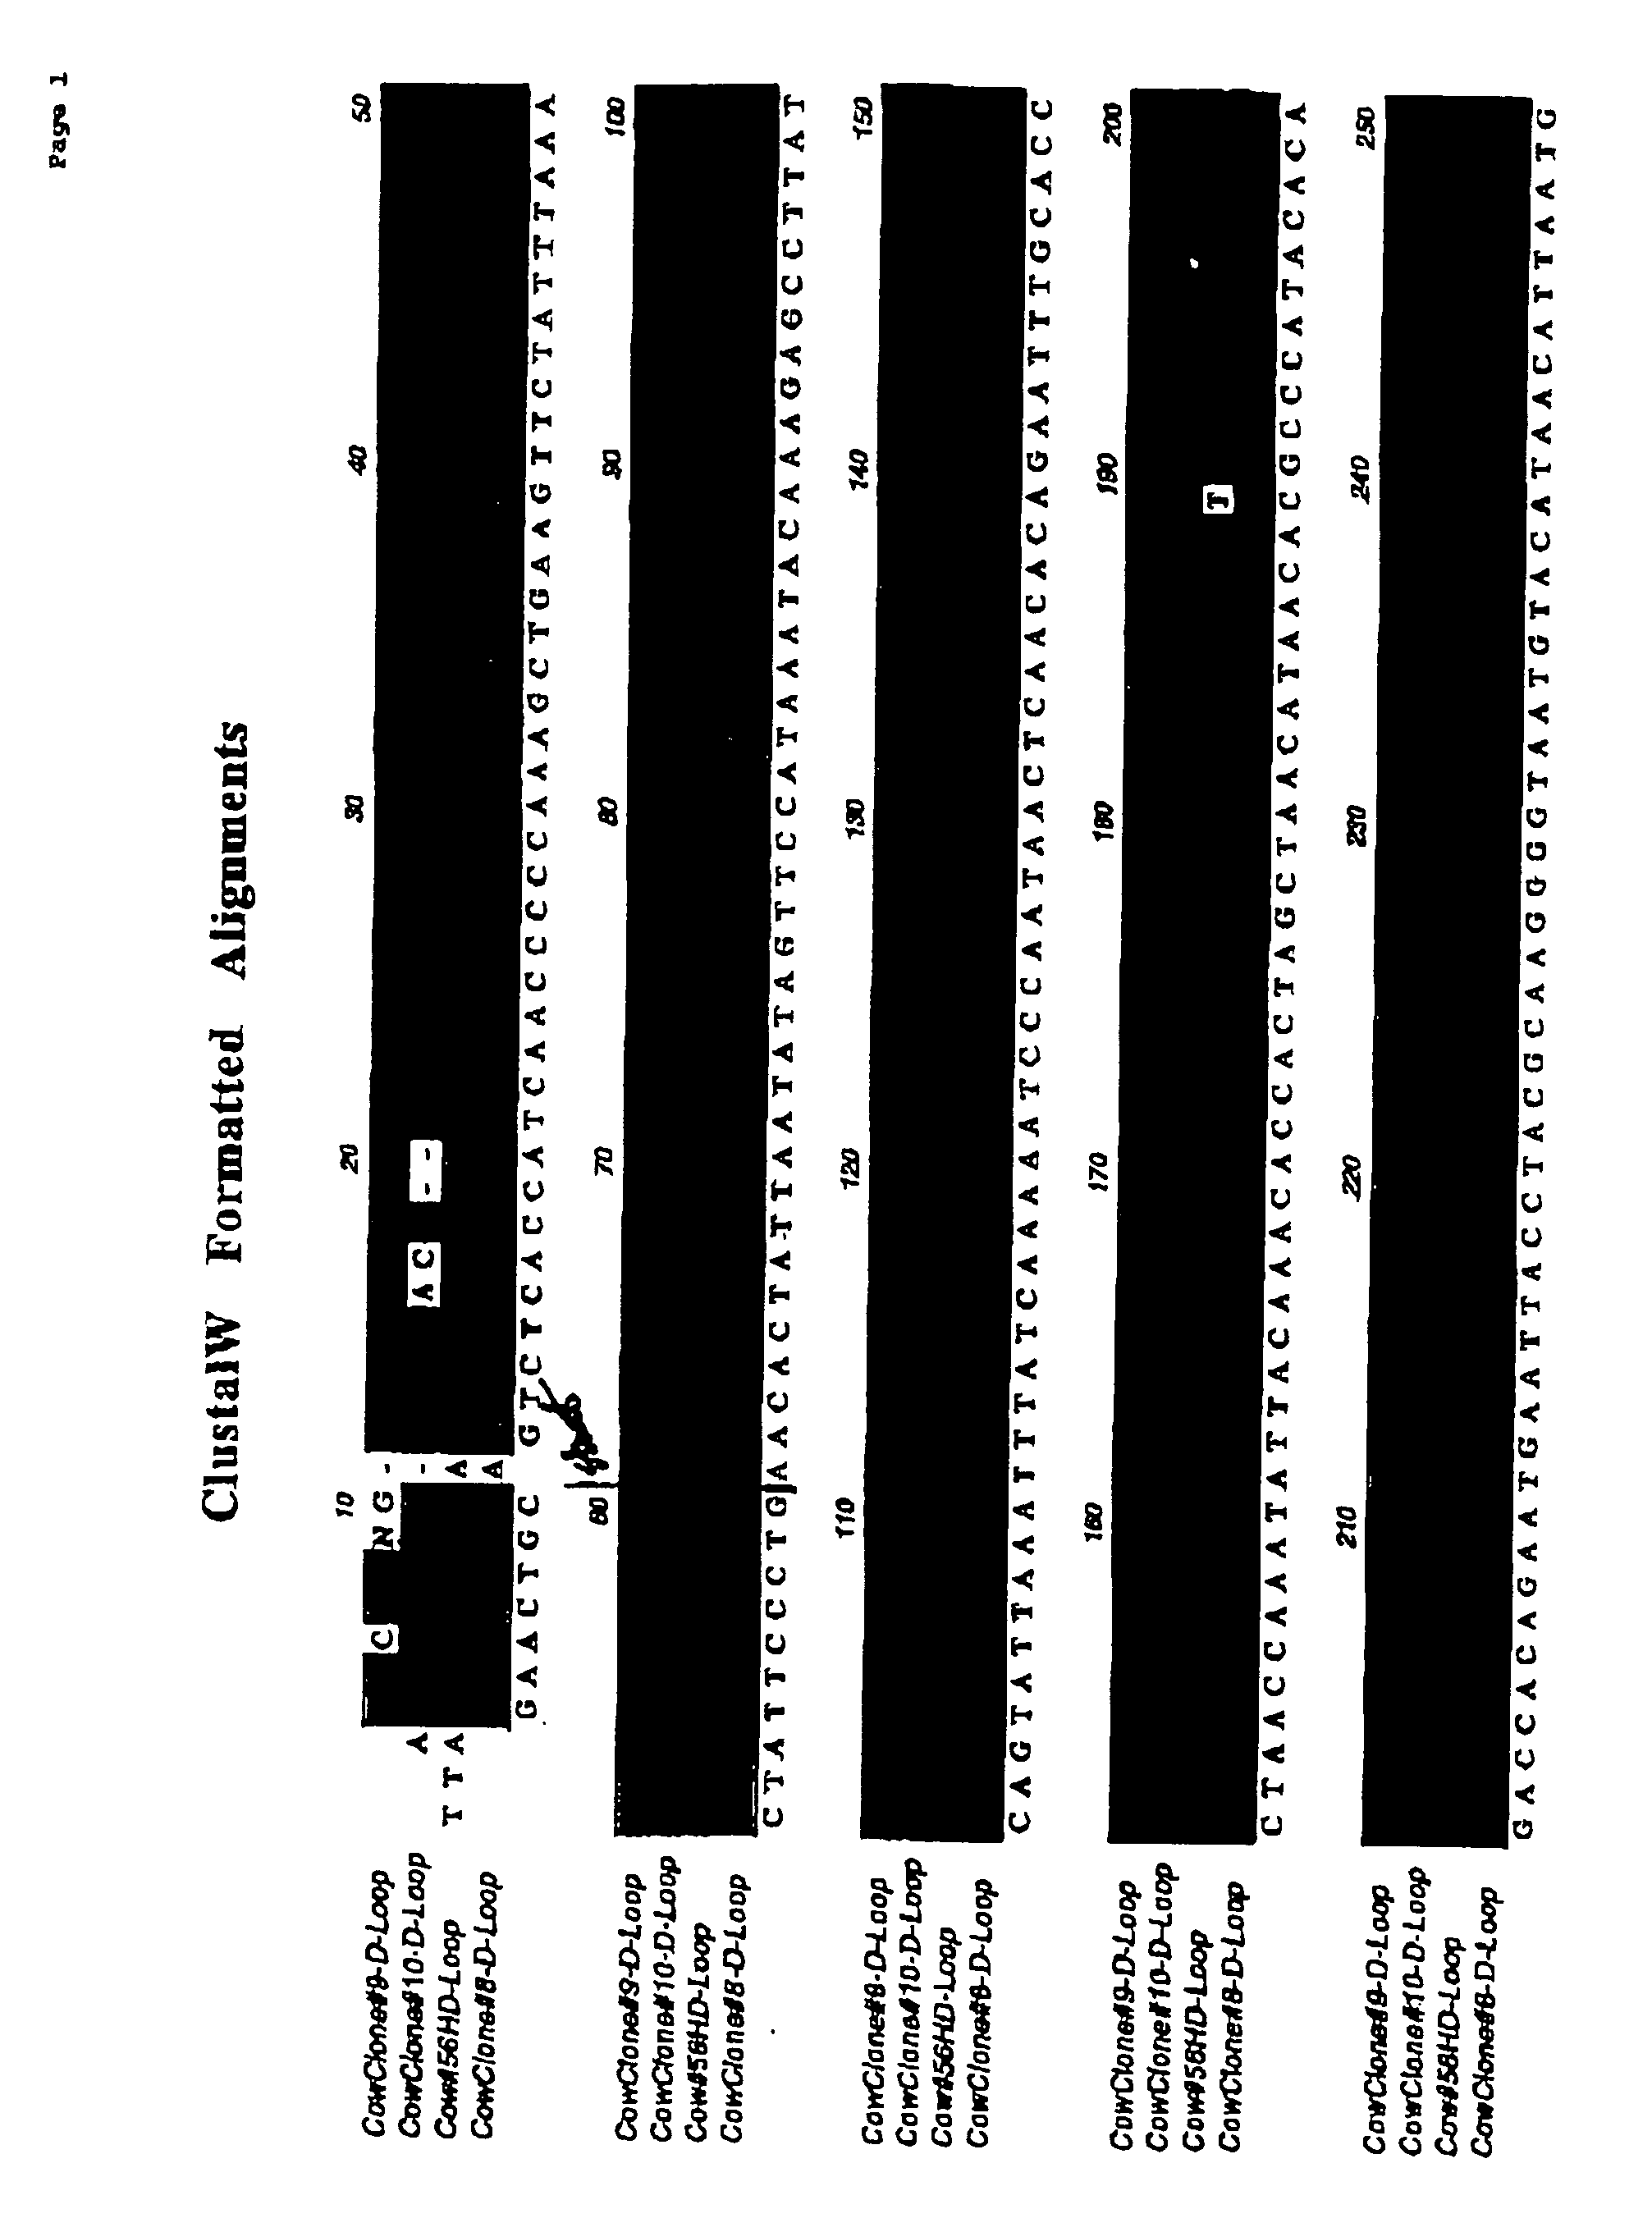 Method for generating immune-compatible cells and tissues using nuclear transfer techniques